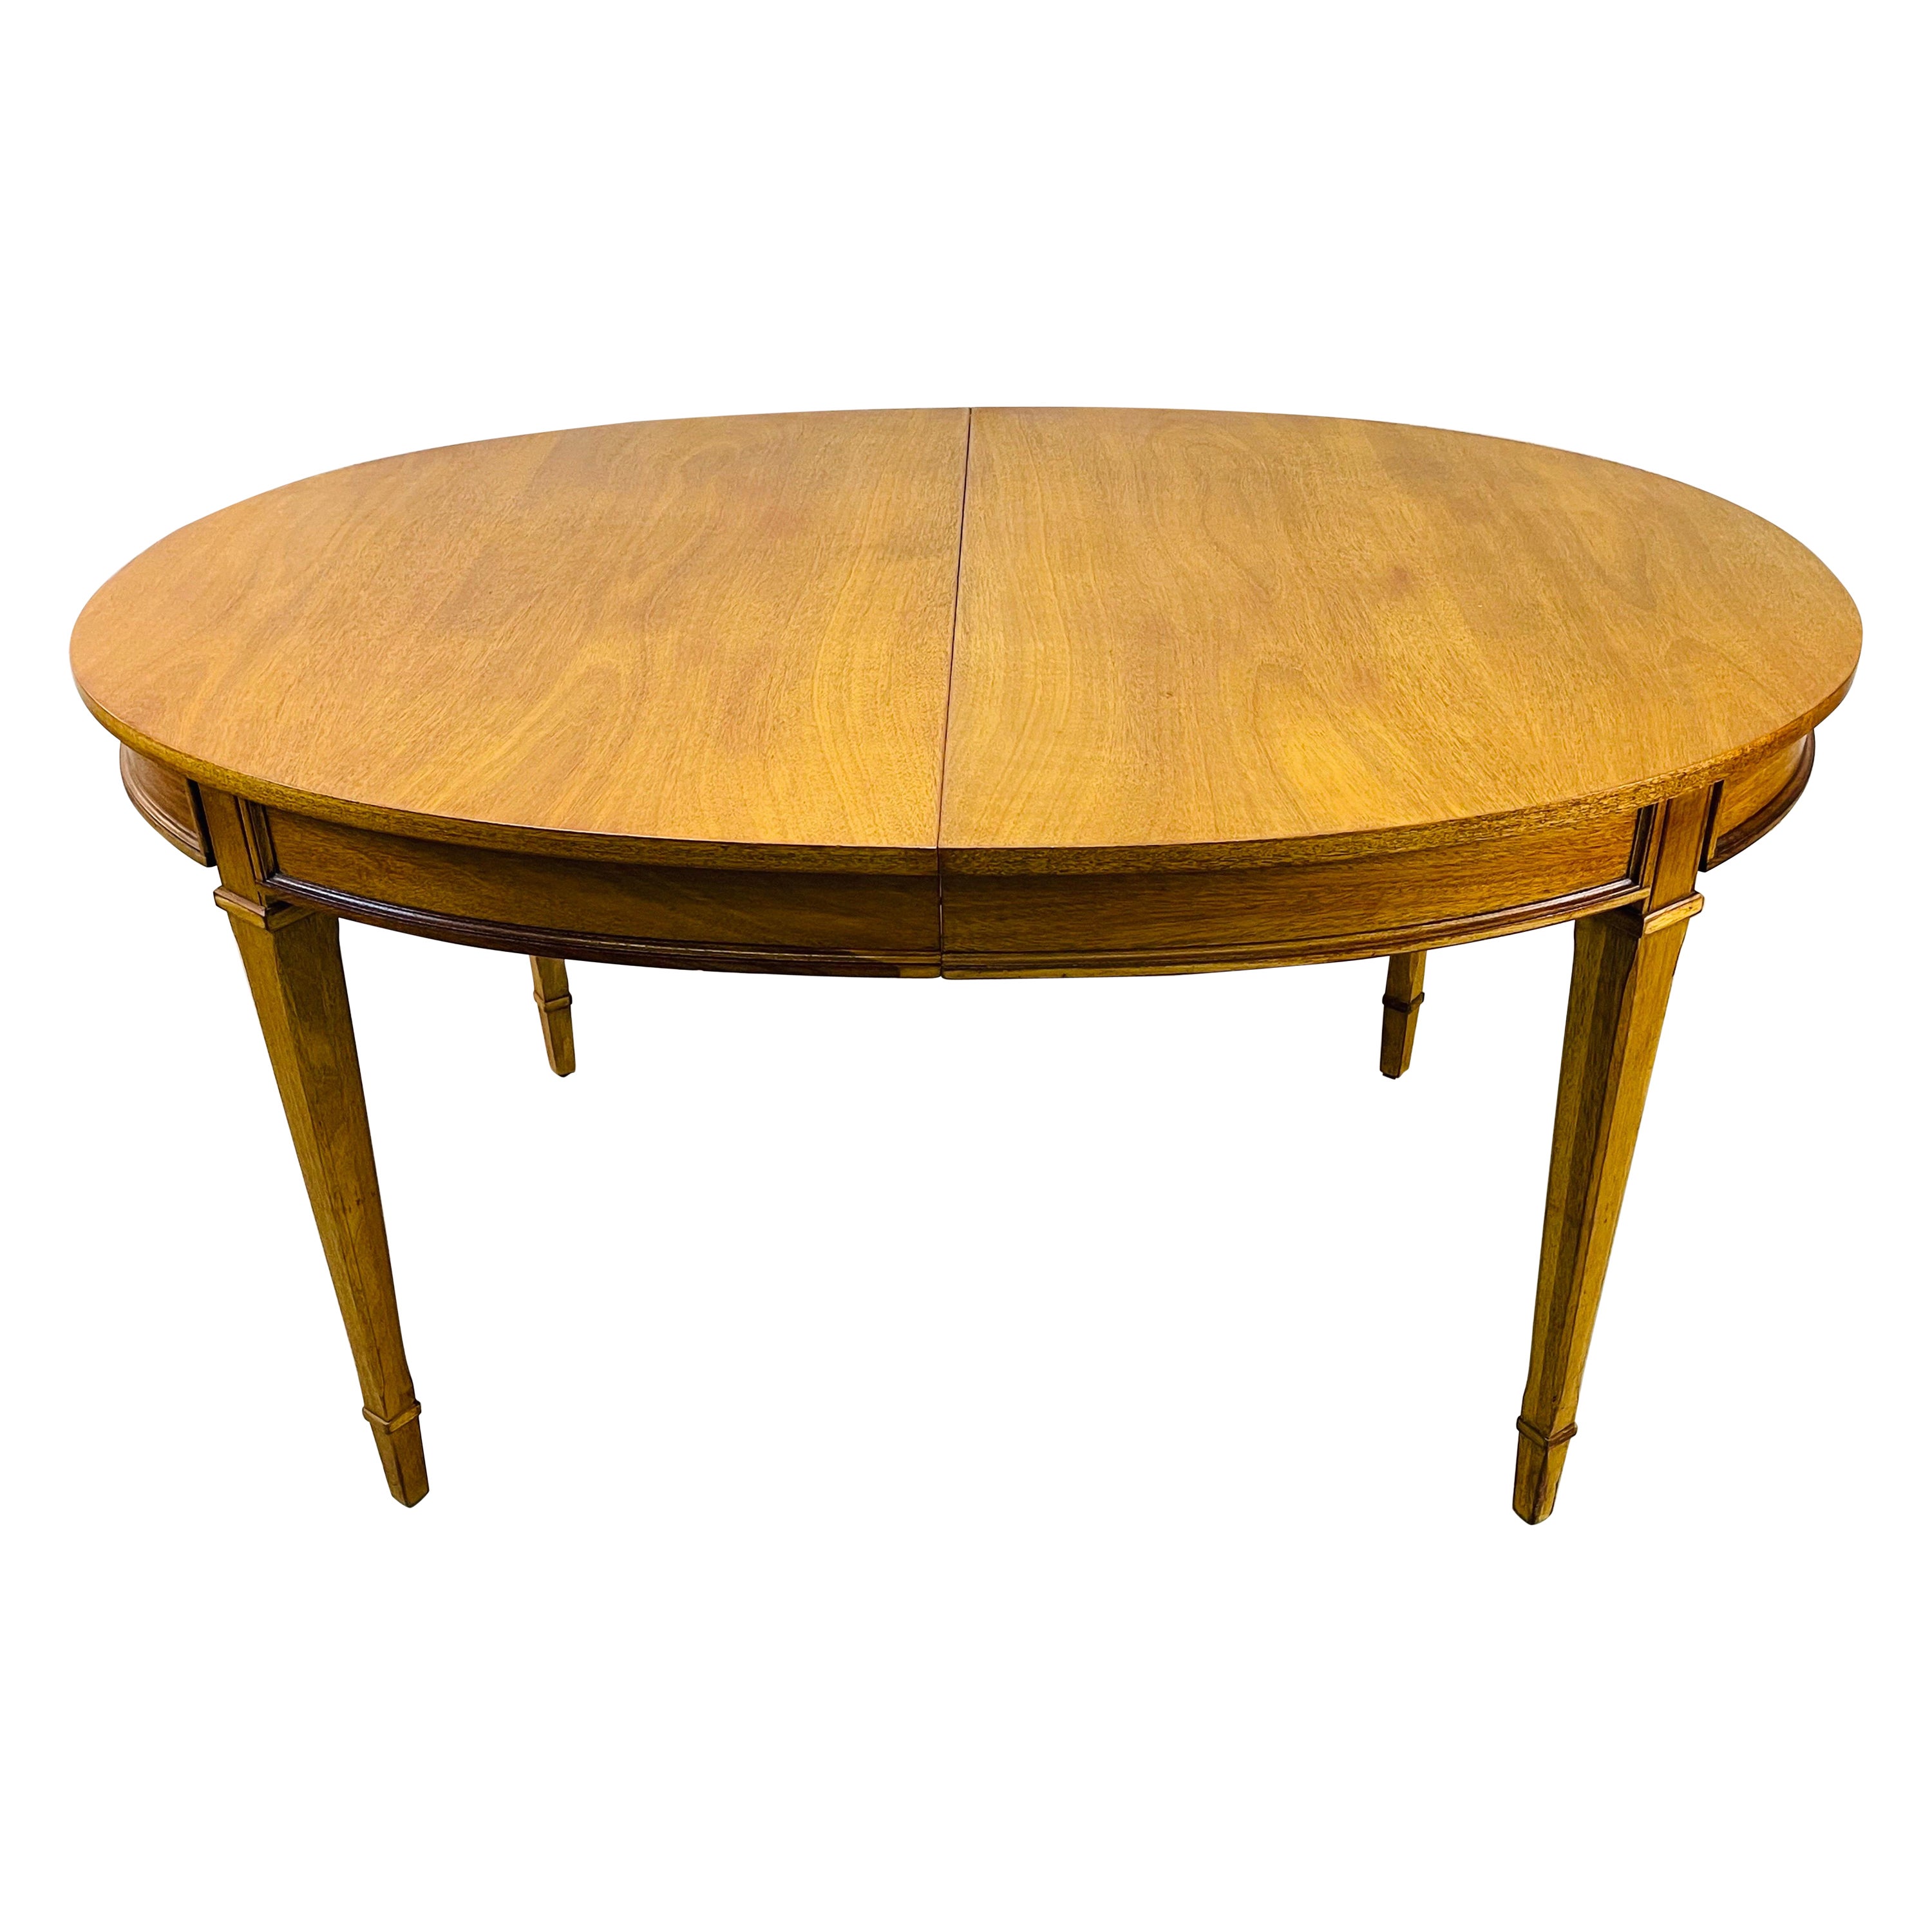 1960s Drexel Oval Mahogany Dining Room Table For Sale